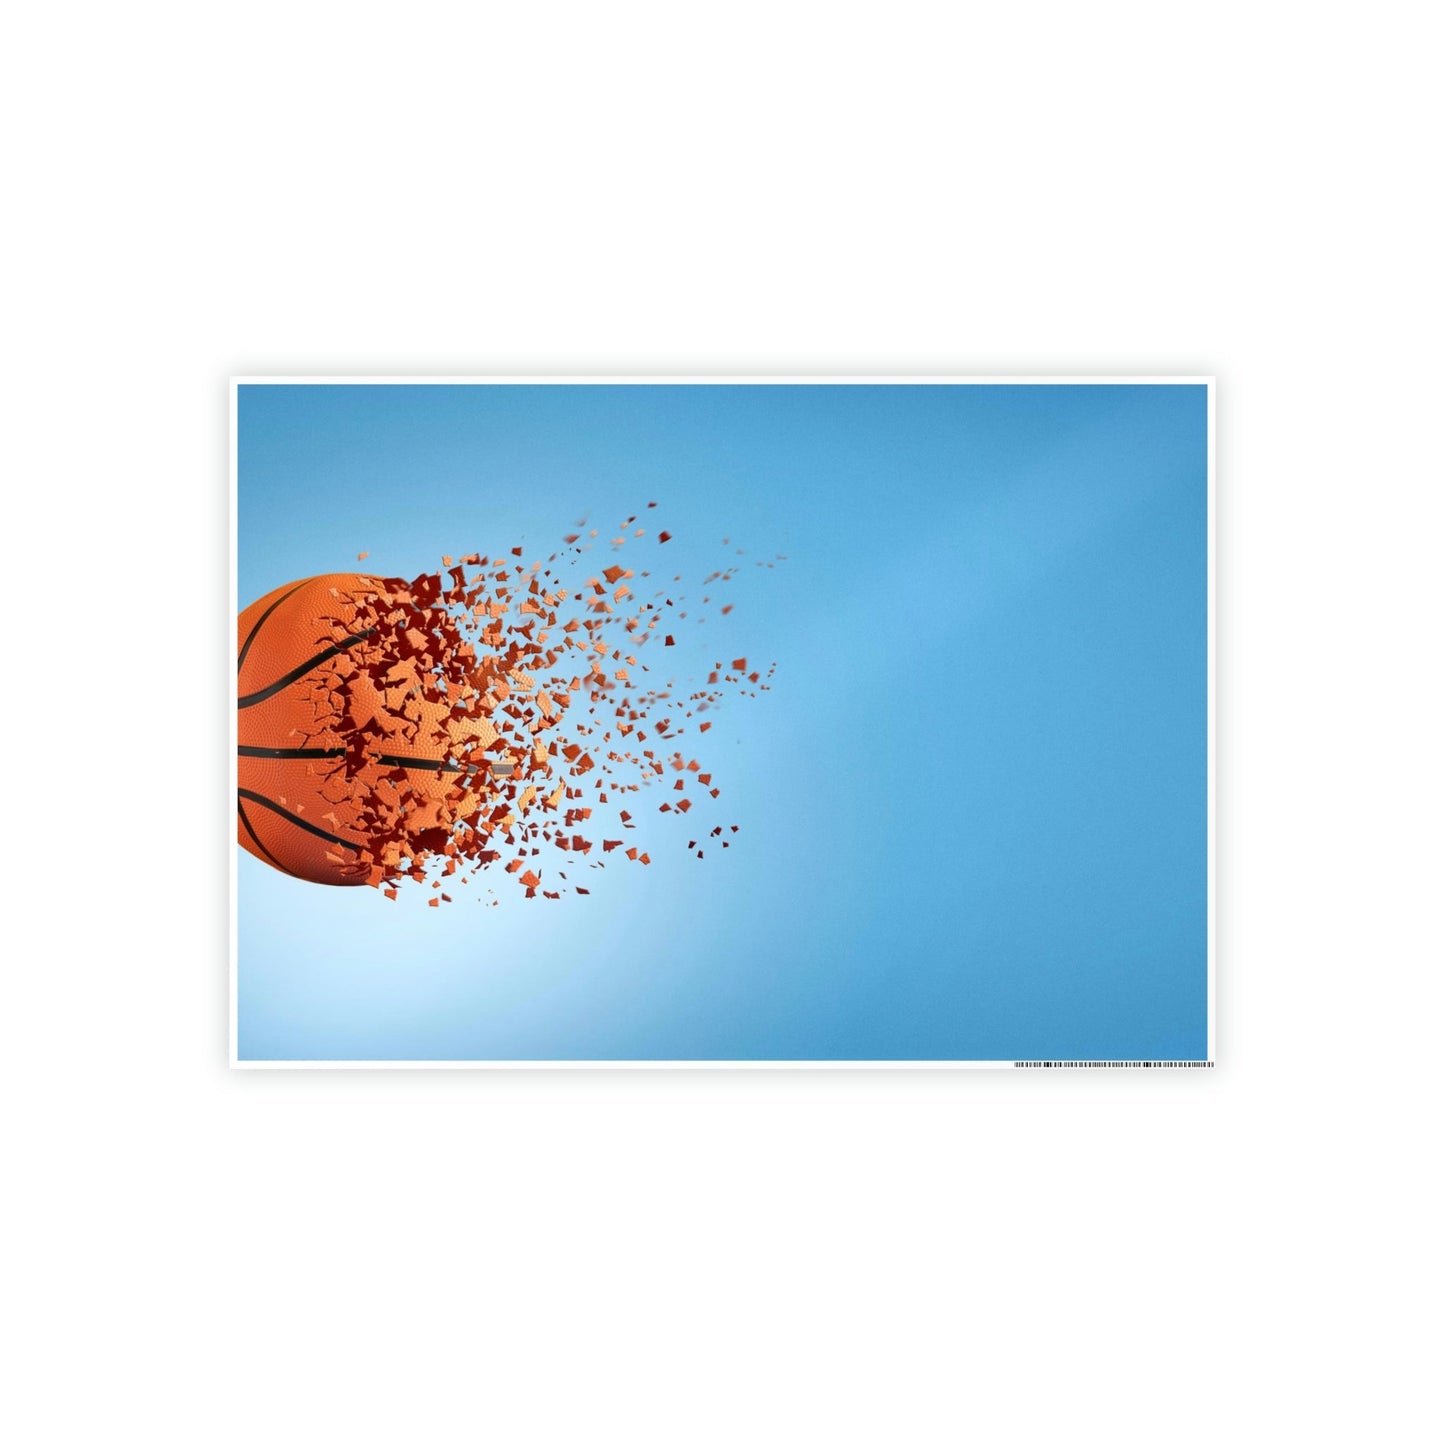 Basketball Magic: Print on Canvas and Framed Posters for Fans of the Game